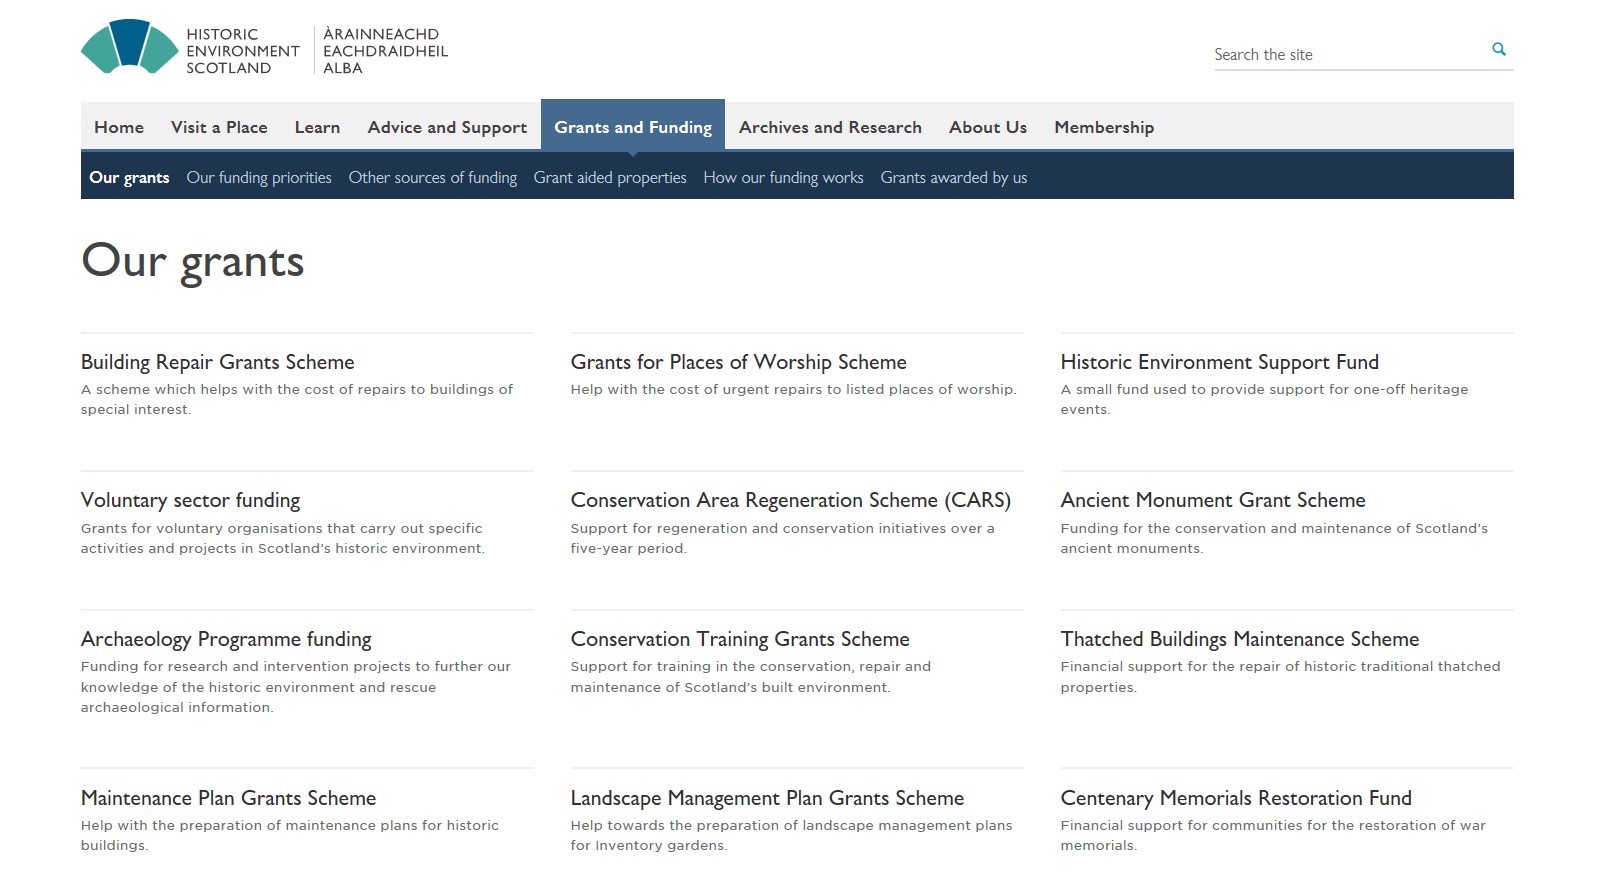 The Grants and Funding section of the HES website.